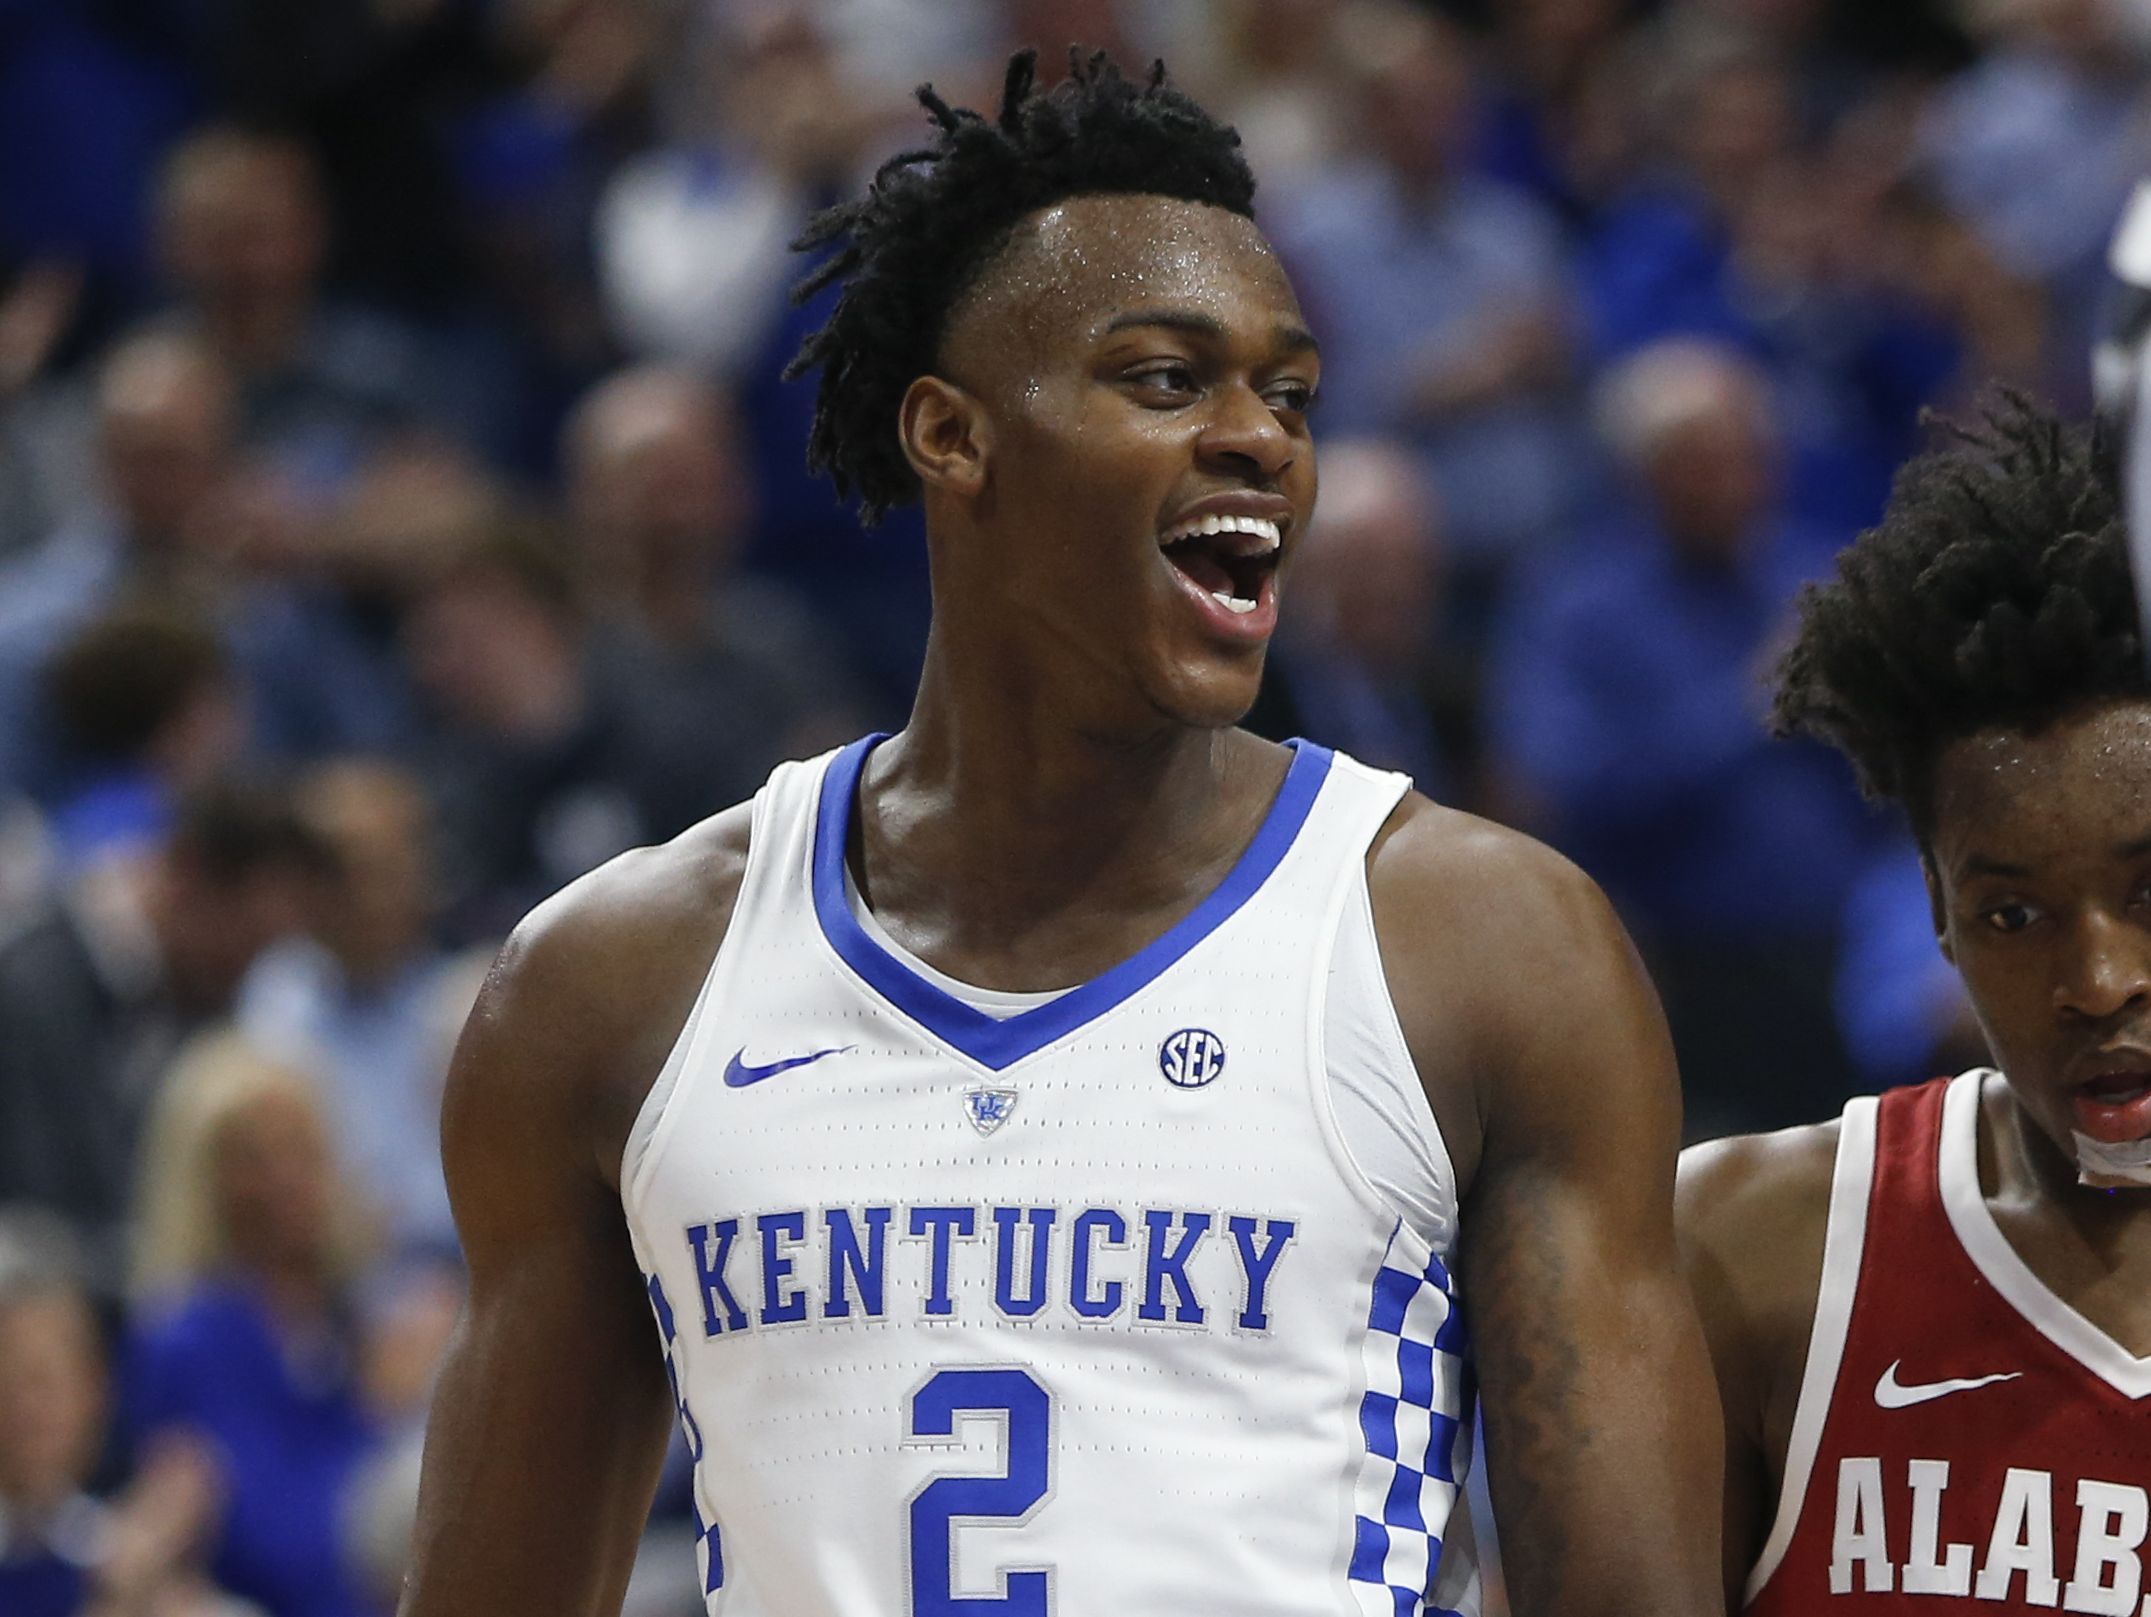 Jarred Vanderbilt unlikely to return from ankle injury in time for NCAA